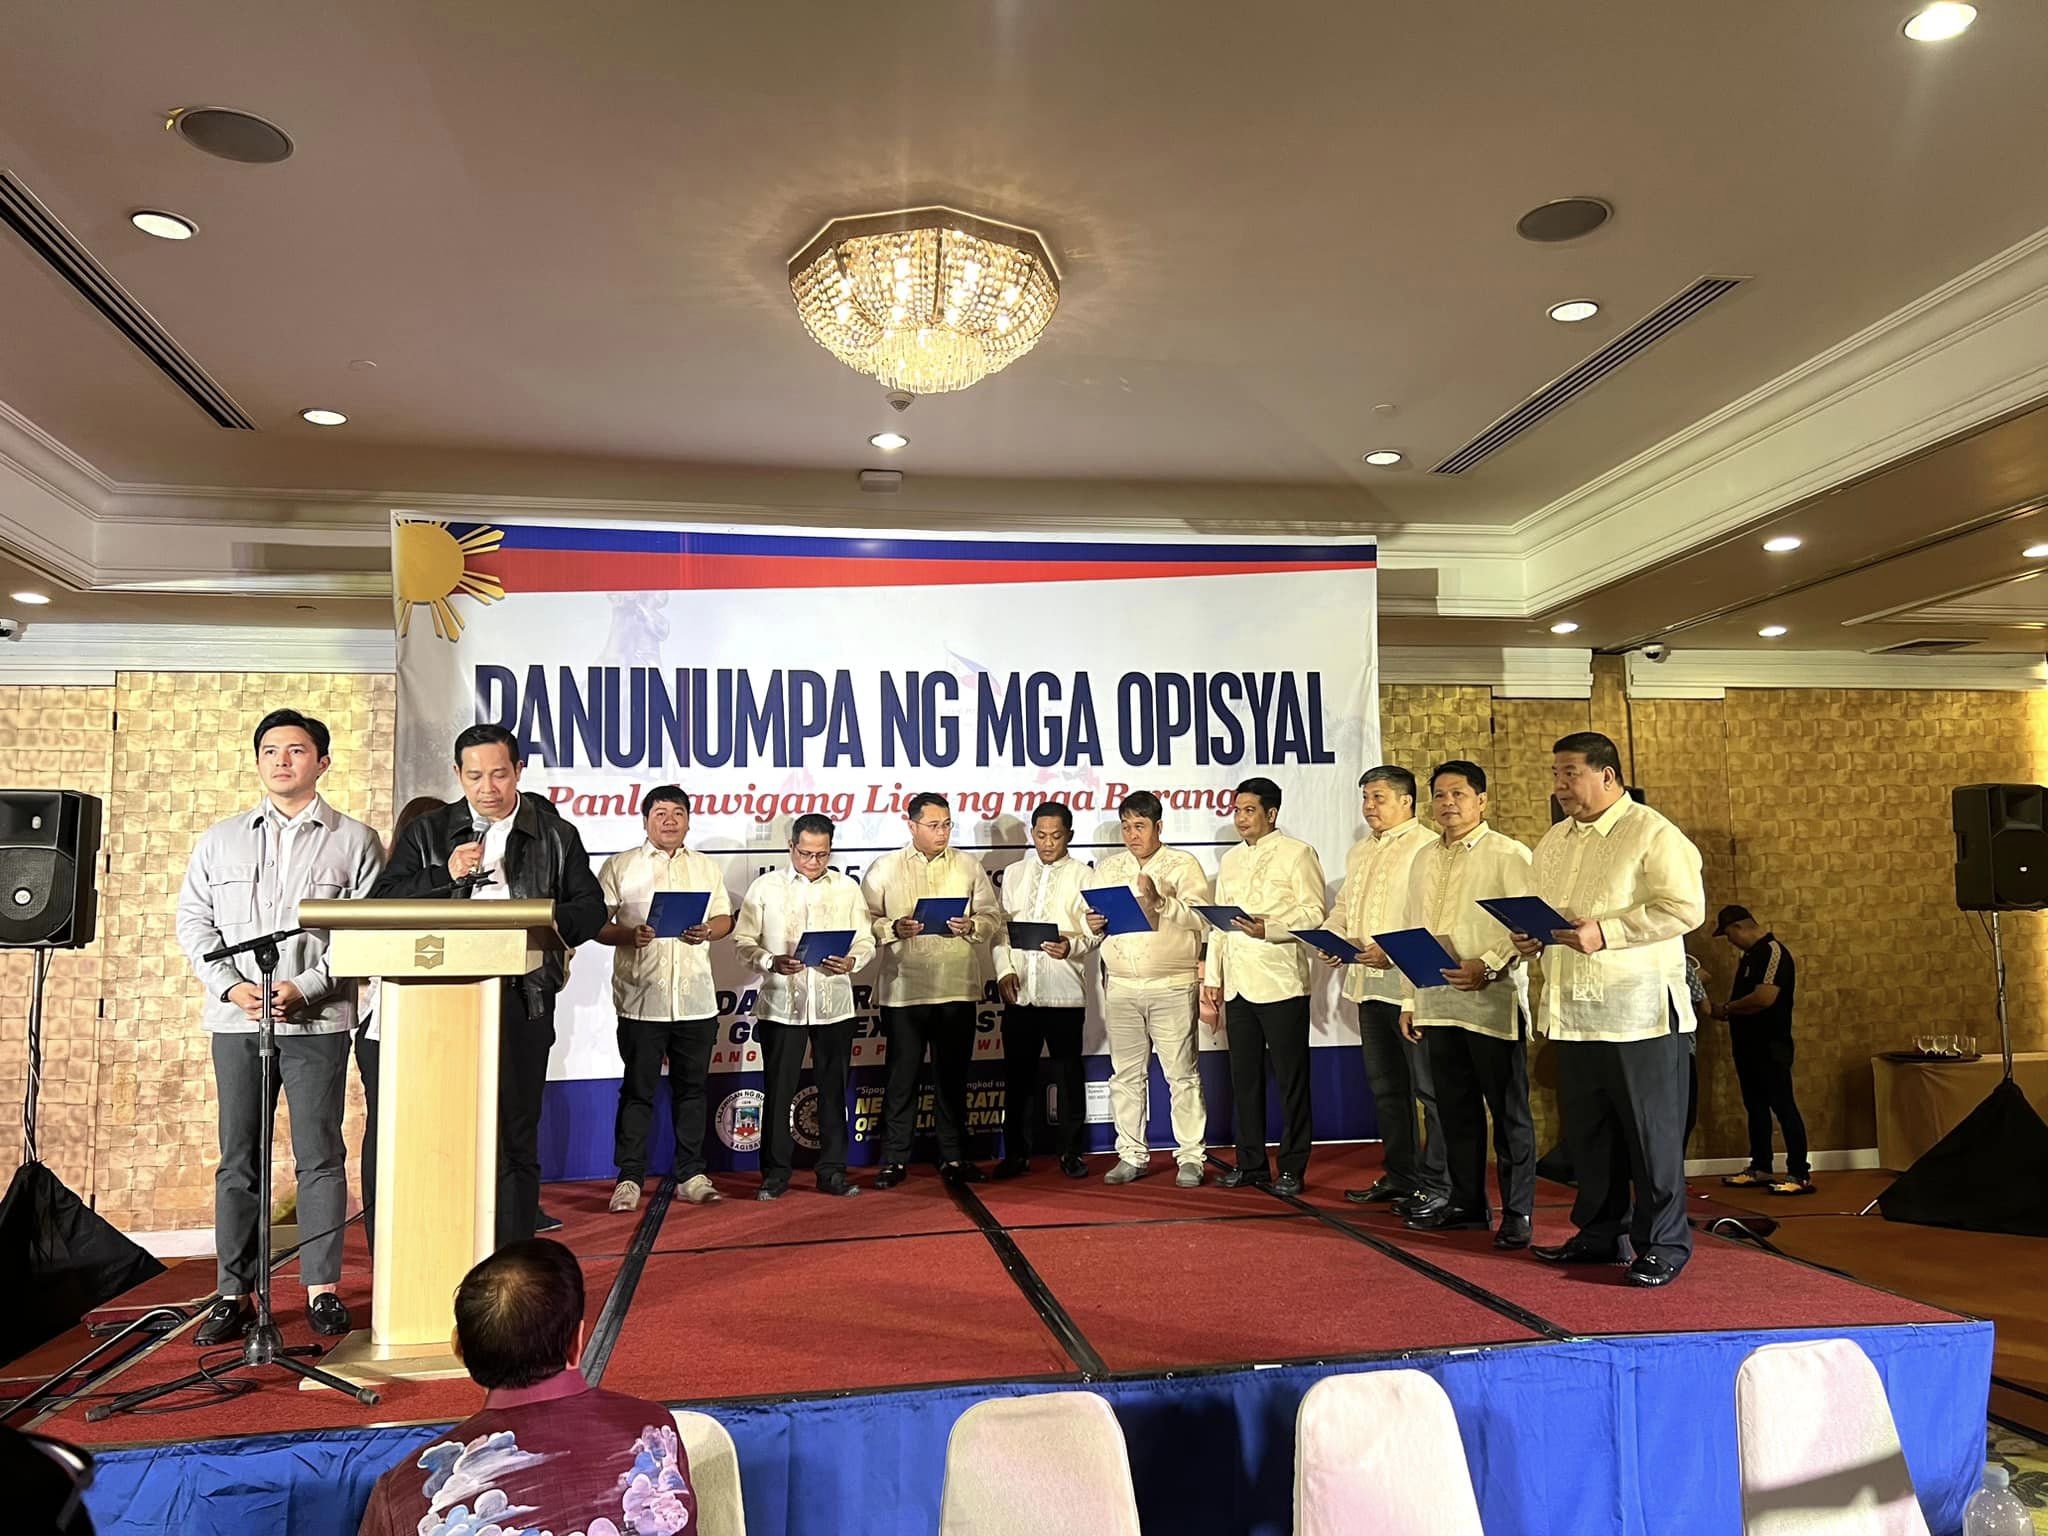 Governor Fernando leads the oath taking of the Liga ng mga Barangay Bulacan Chapter officers